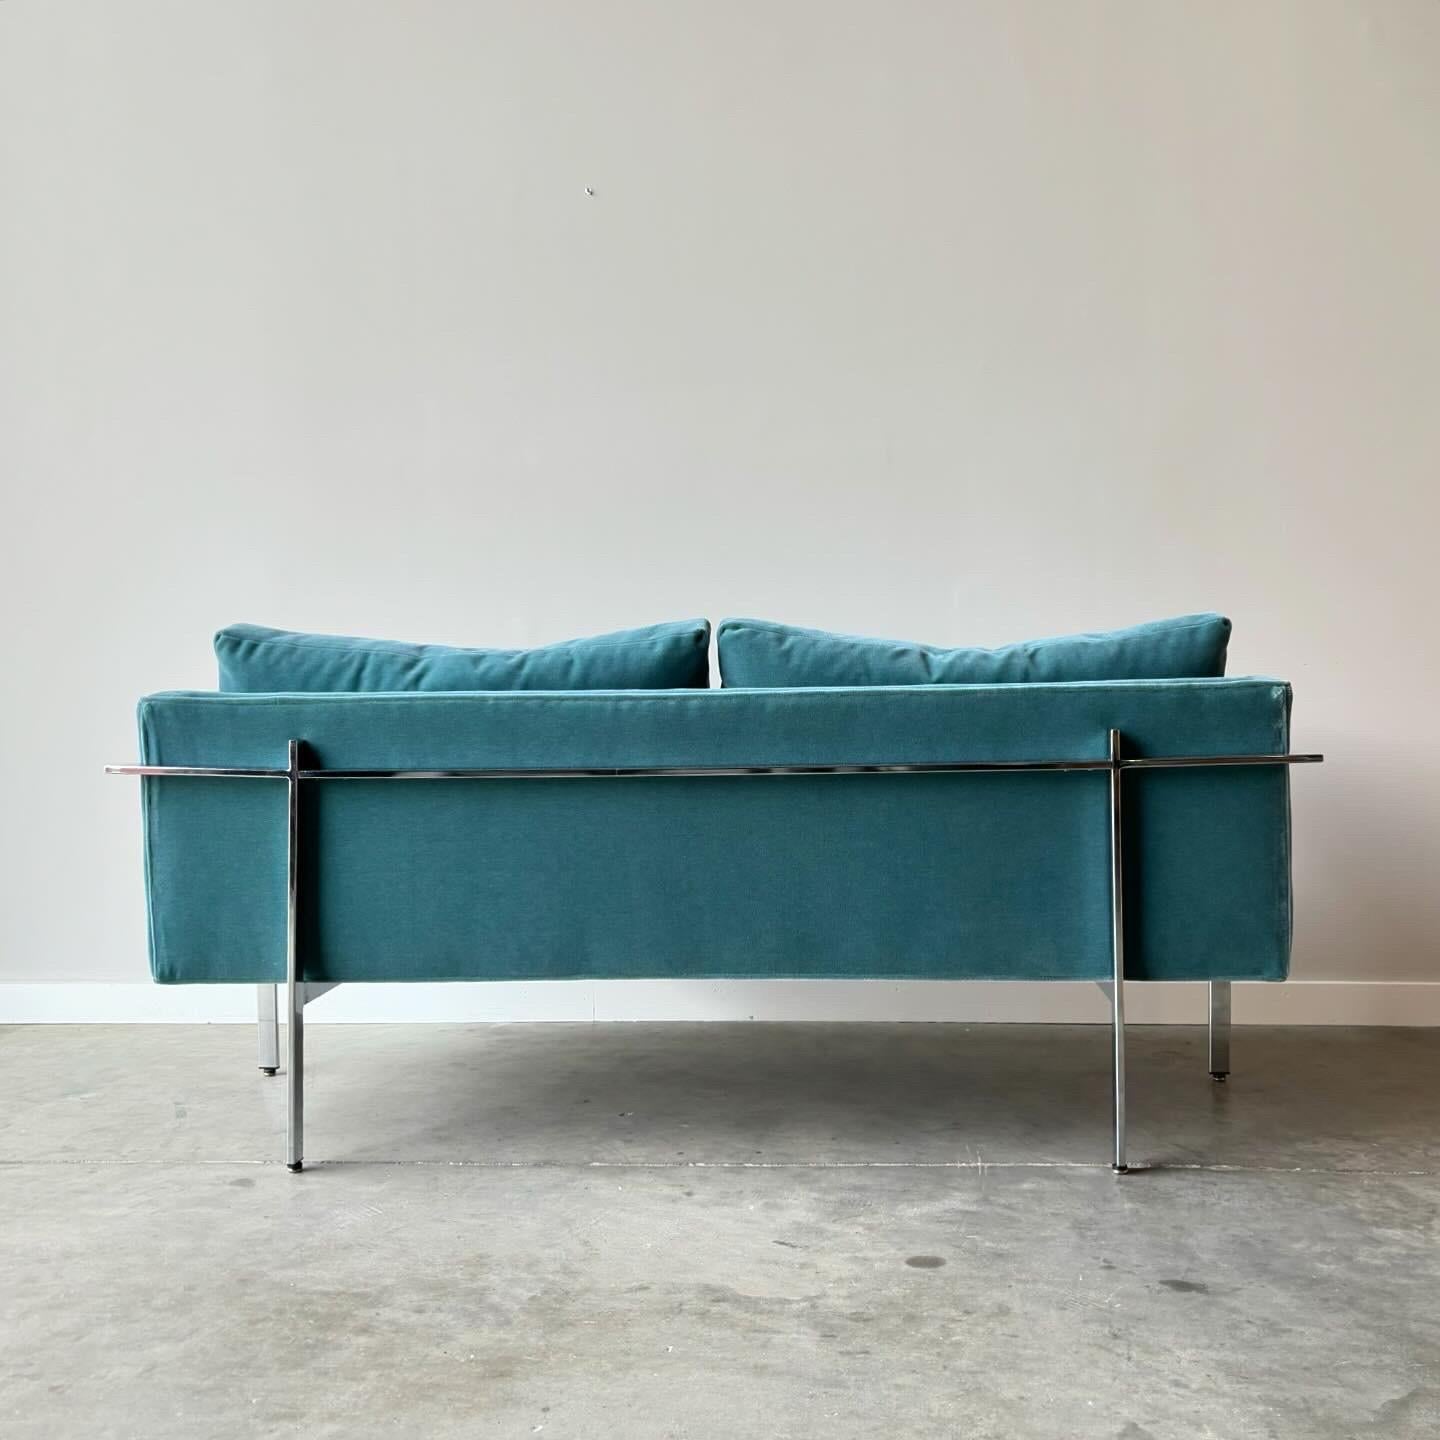 Designed by Milo Baughman in 1968, the Drop In sofa is a timeless, classic modern sofa, with striking good looks from every angle. 
Polished chrome bar running around the sofa and down the legs. Newly upholstered in teal mohair fabric with new foam